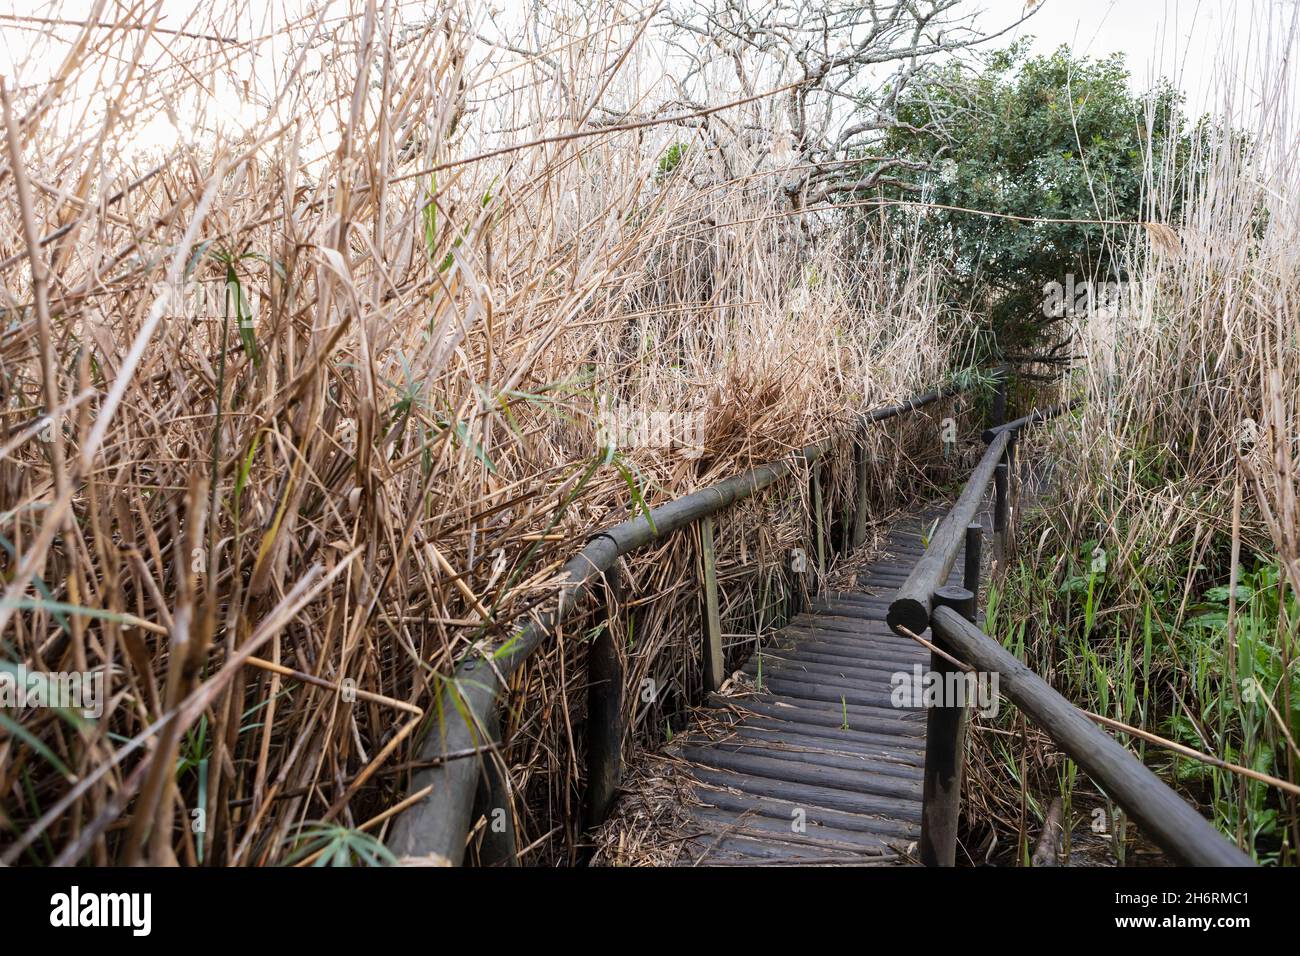 A walkway through the reeds, above the soggy ground and marshes on a riverbank. Stock Photo